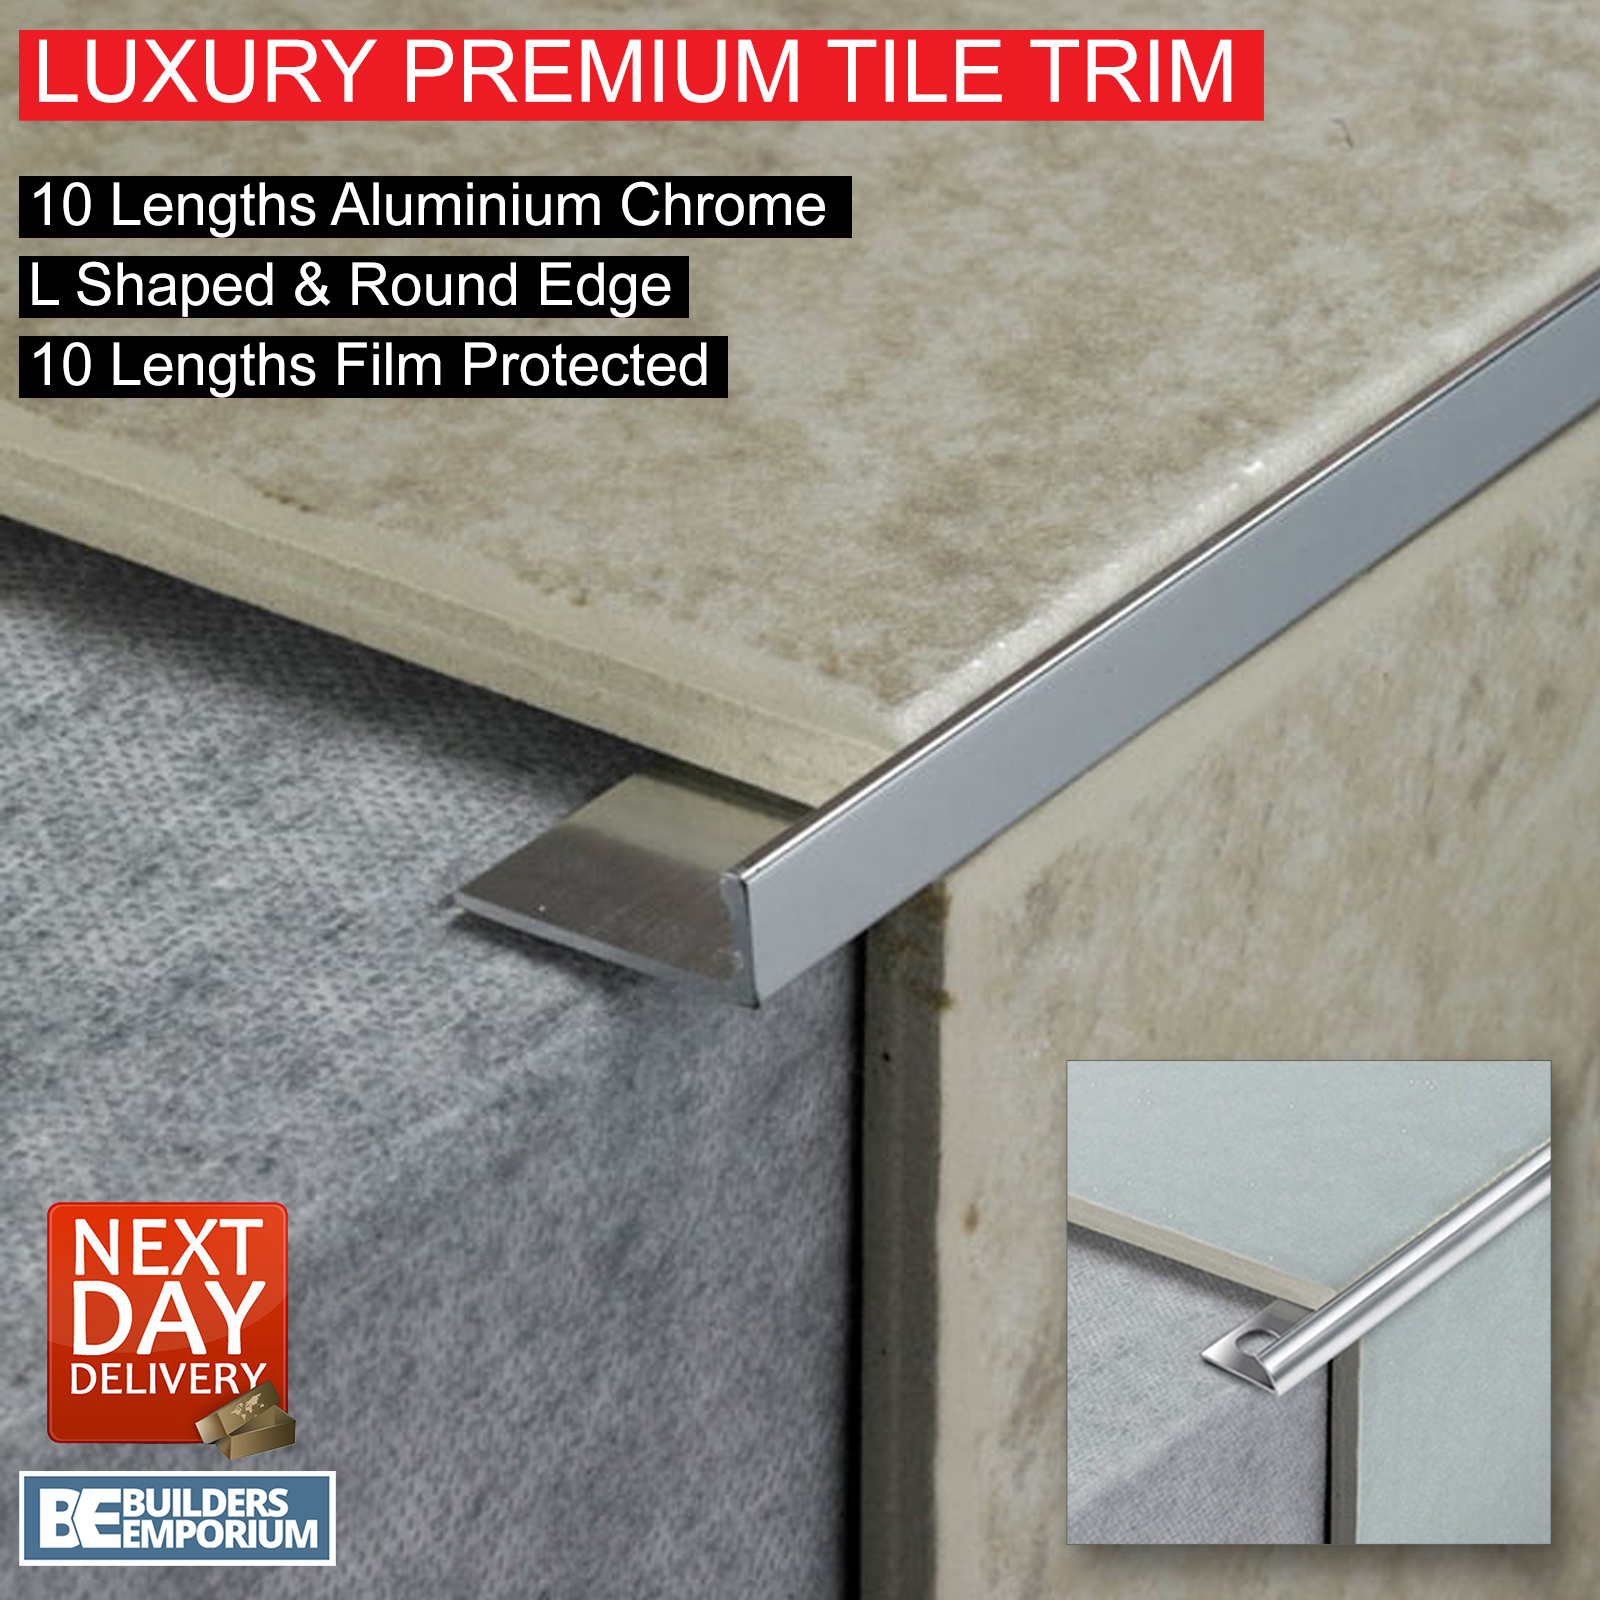 Details About 10x Tile Trim Heavy Duty L Shaped Or Round Edge Aluminium Chrome 810 12mm pertaining to dimensions 1600 X 1600